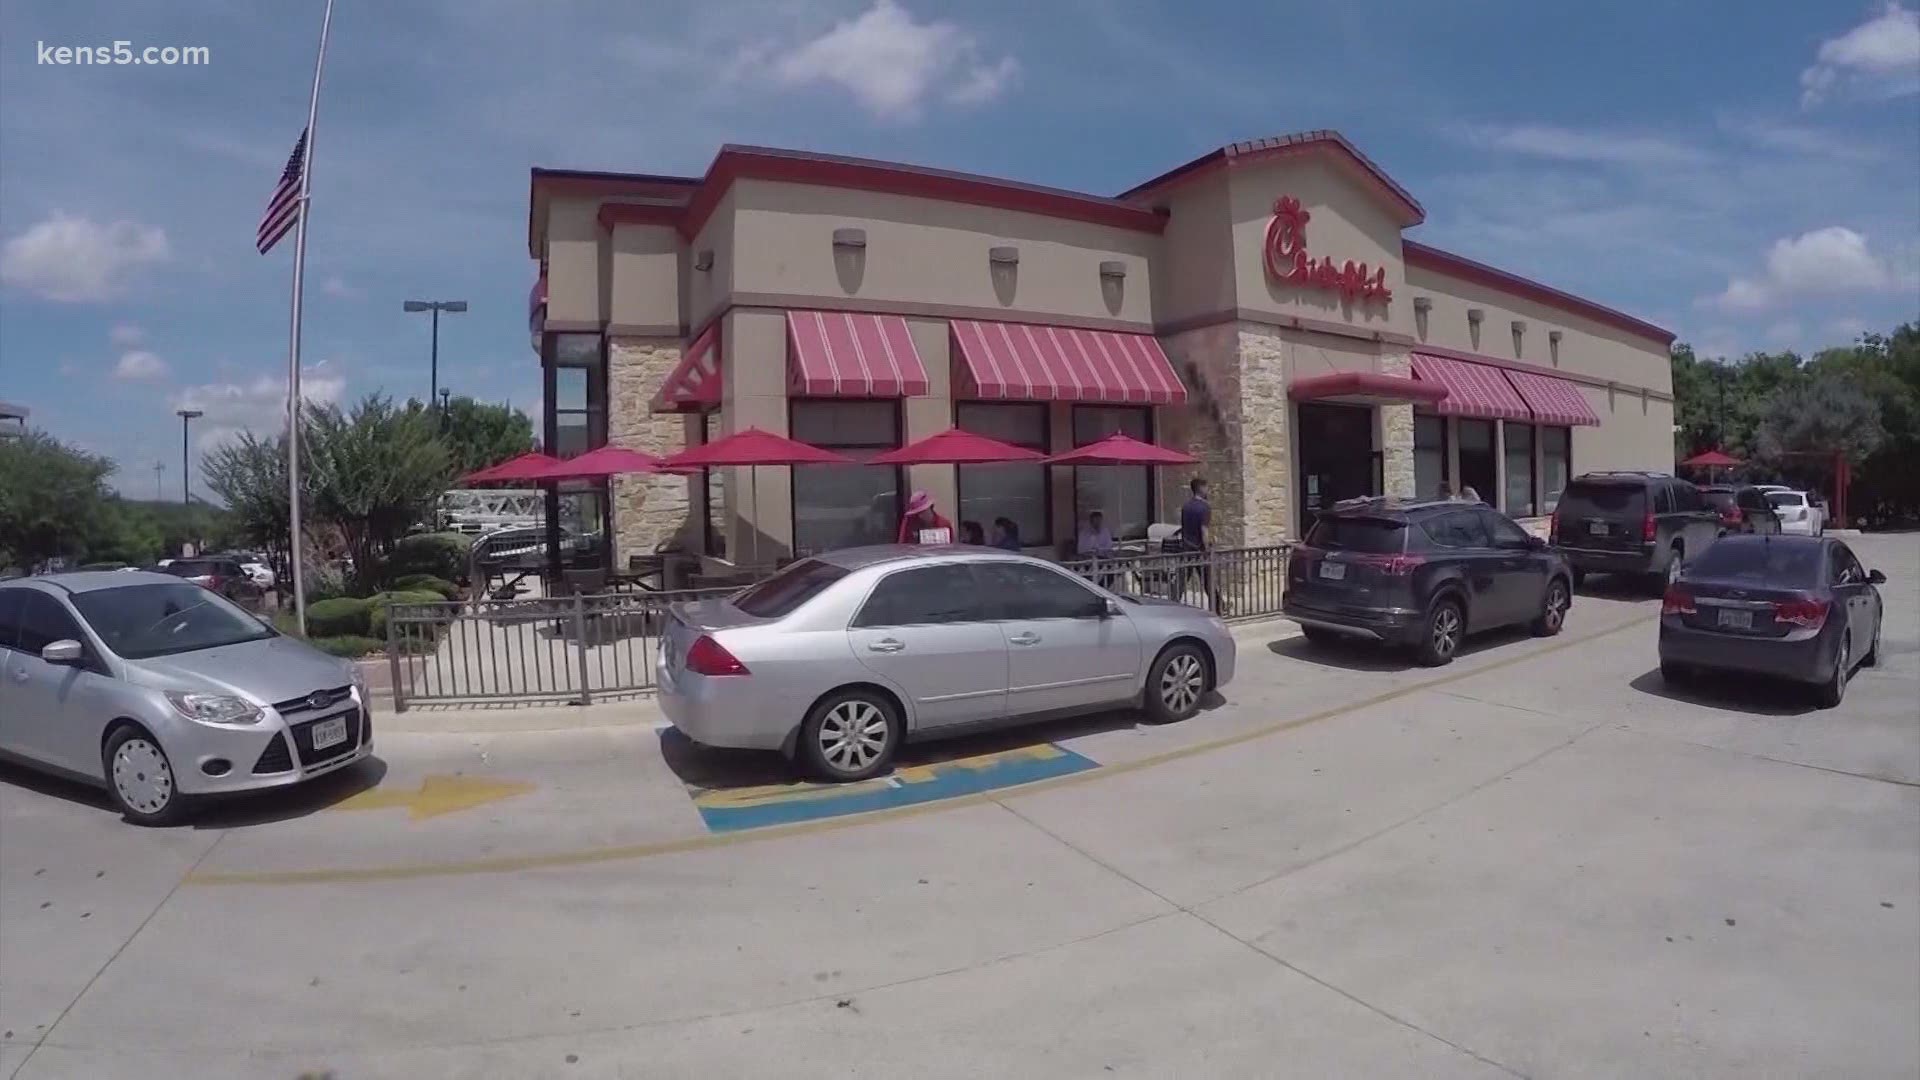 "The FAA has not ordered the City of San Antonio to have Chick-Fil-A at its airport," City Attorney Andy Segovia said.